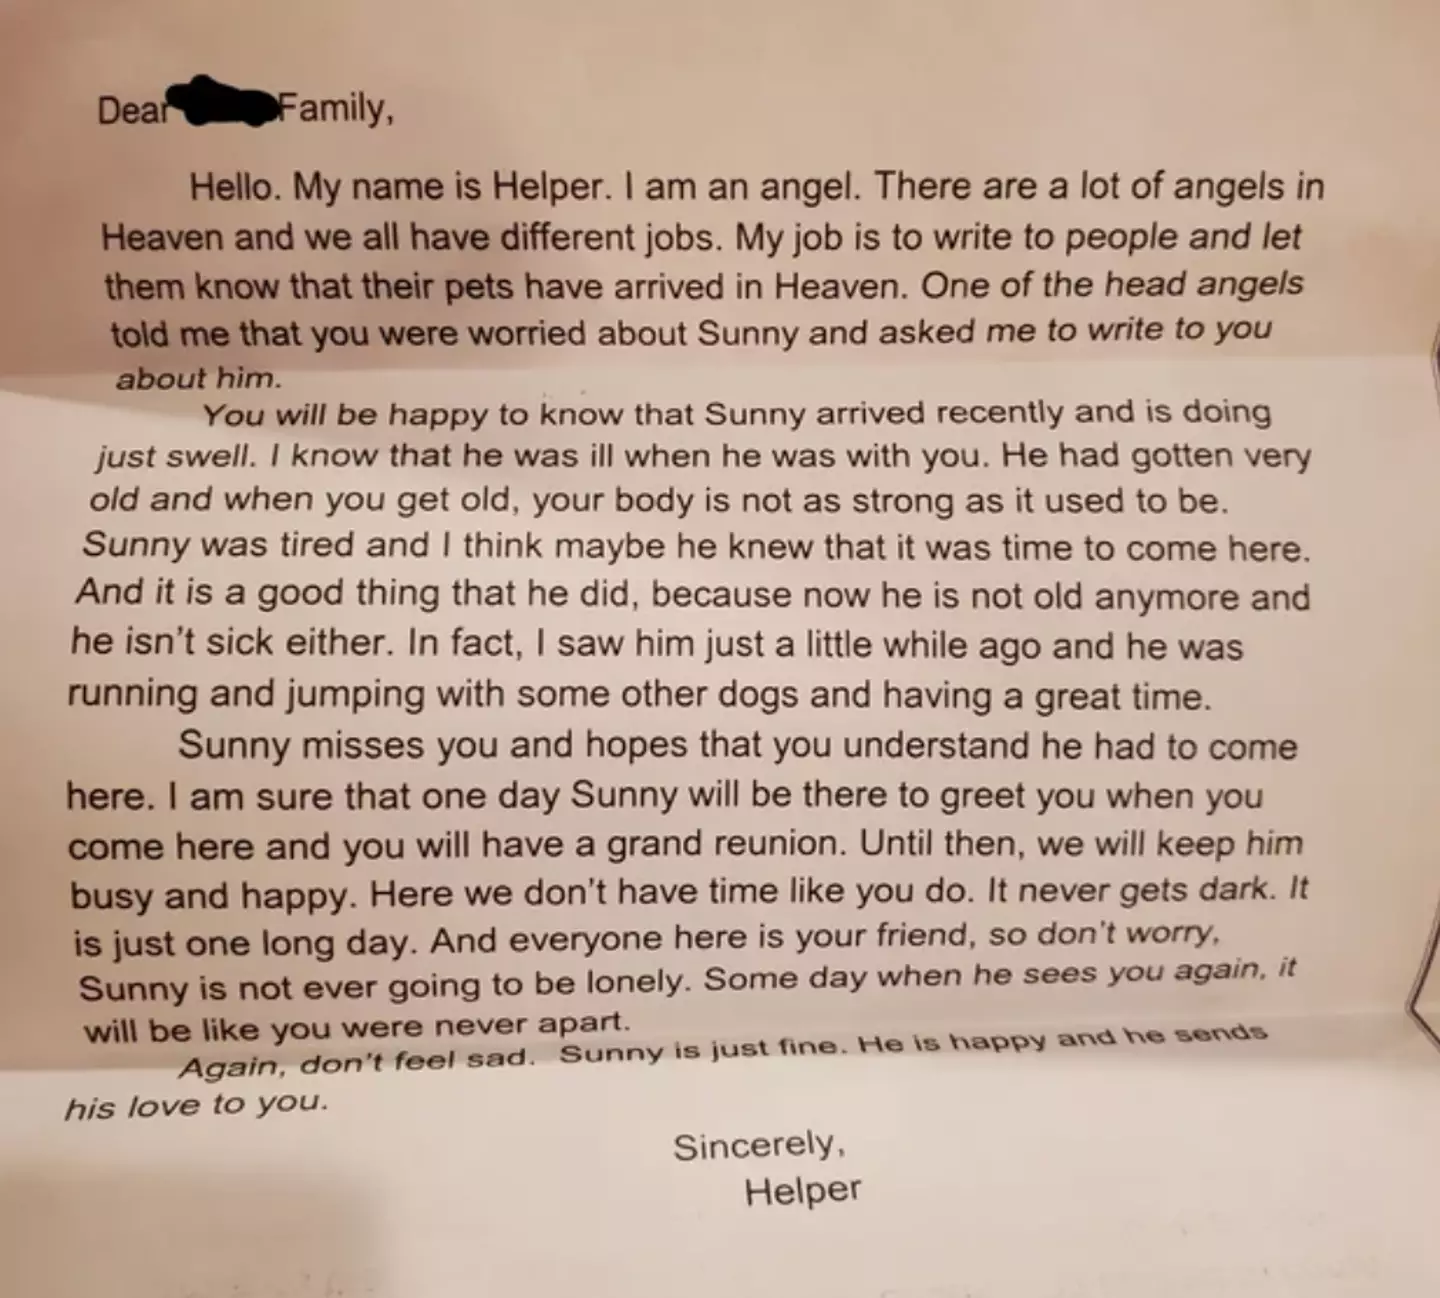 The family got the letter after saying goodbye to their dog.